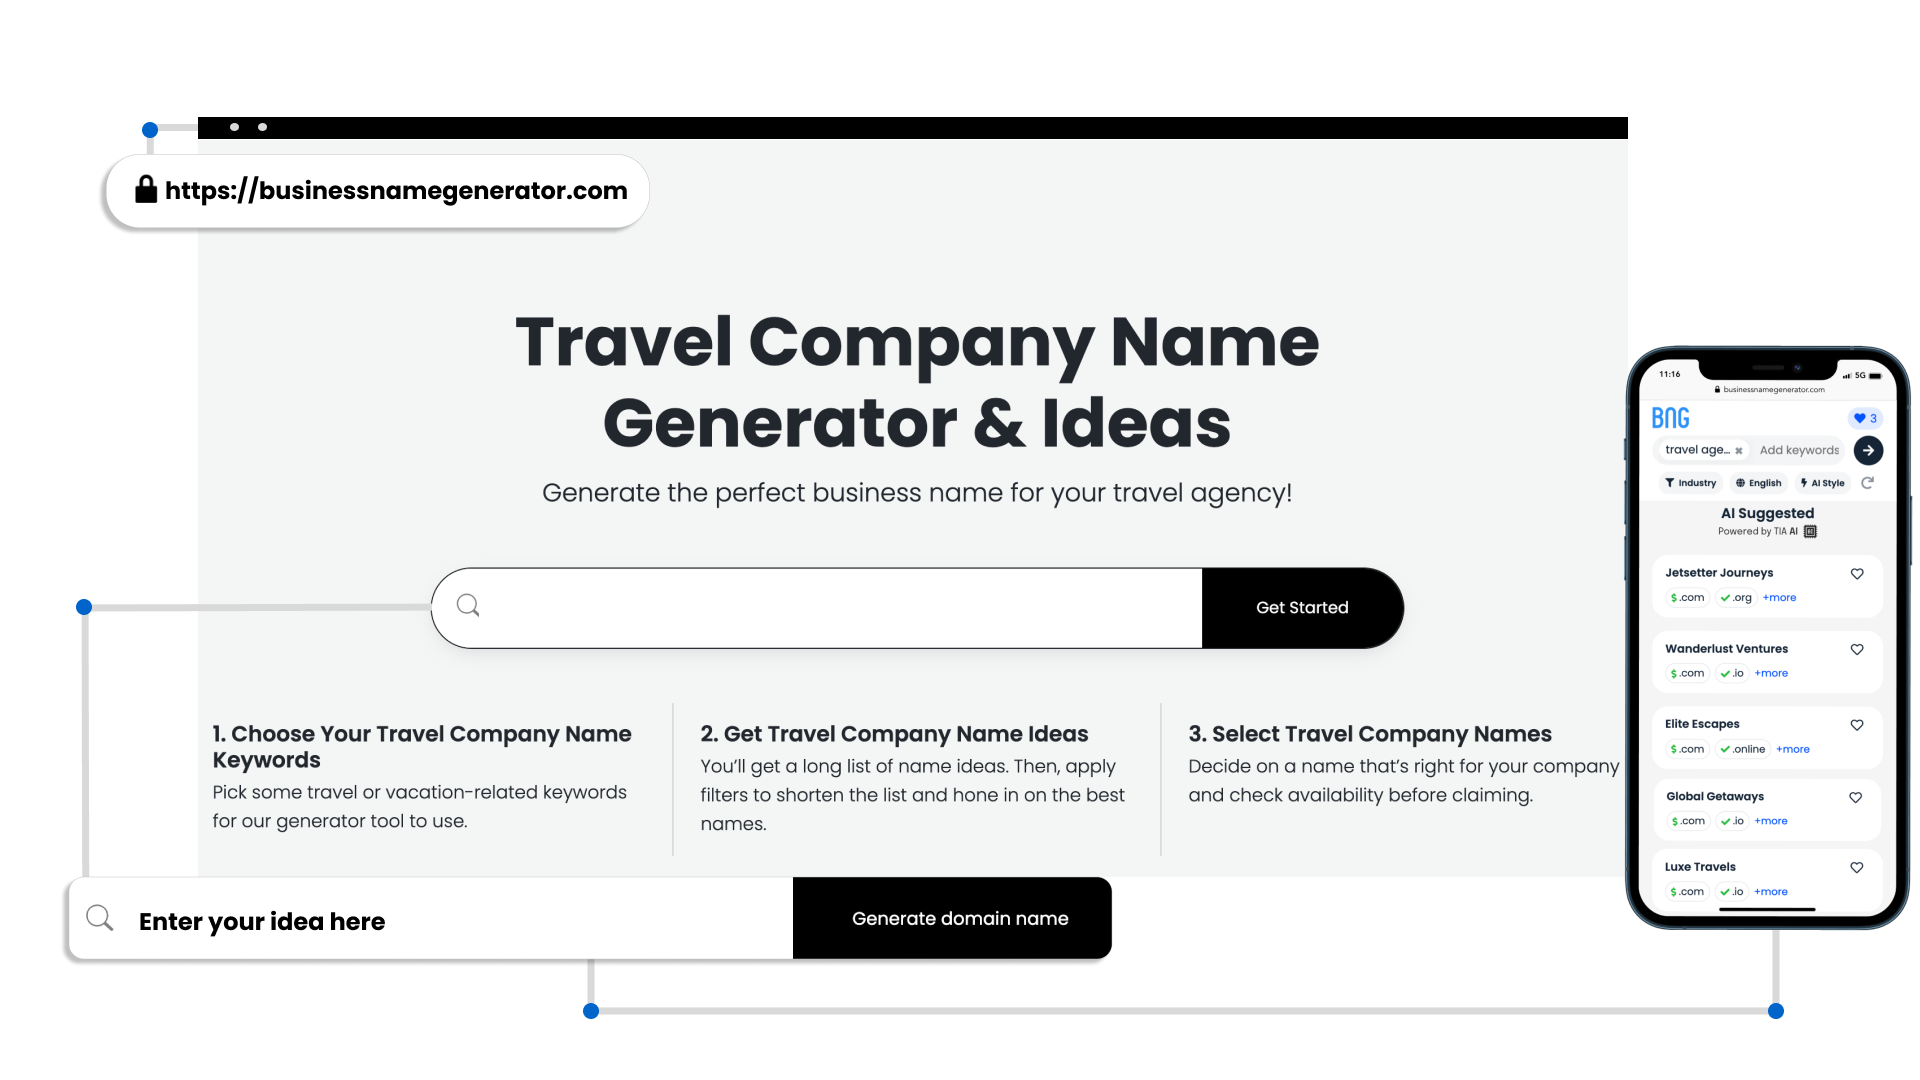 Benefits of Our Travel Company Name Generator